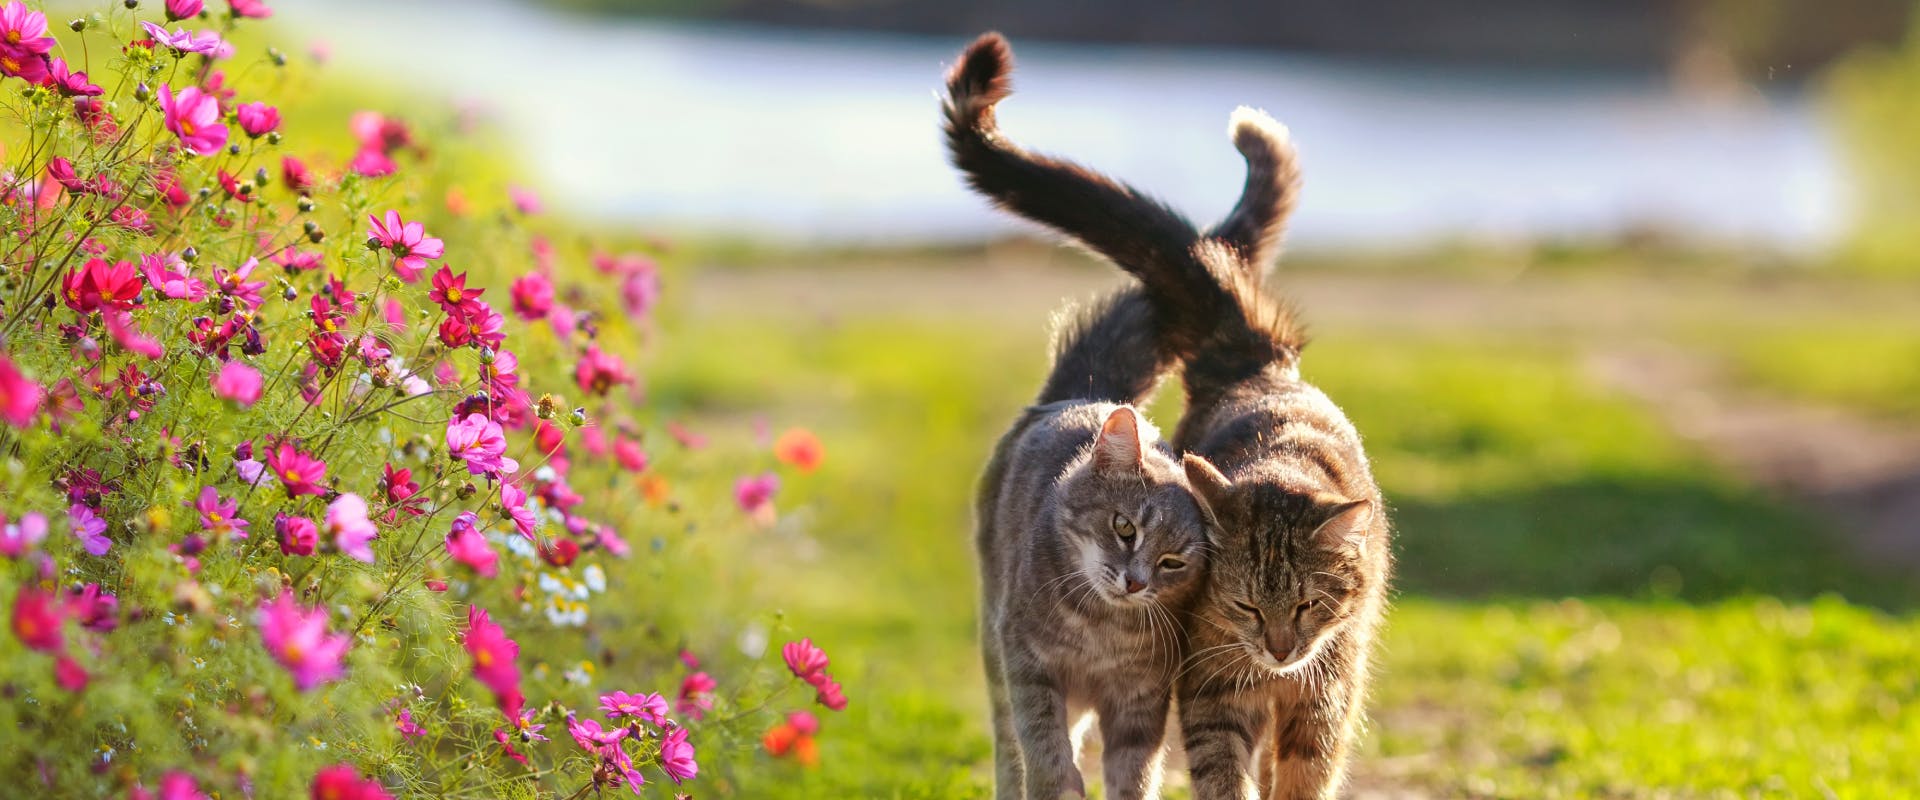 two tabby cats walking through a grass field next to some small pink flowers whilst rubbing against each other and entwining their tails